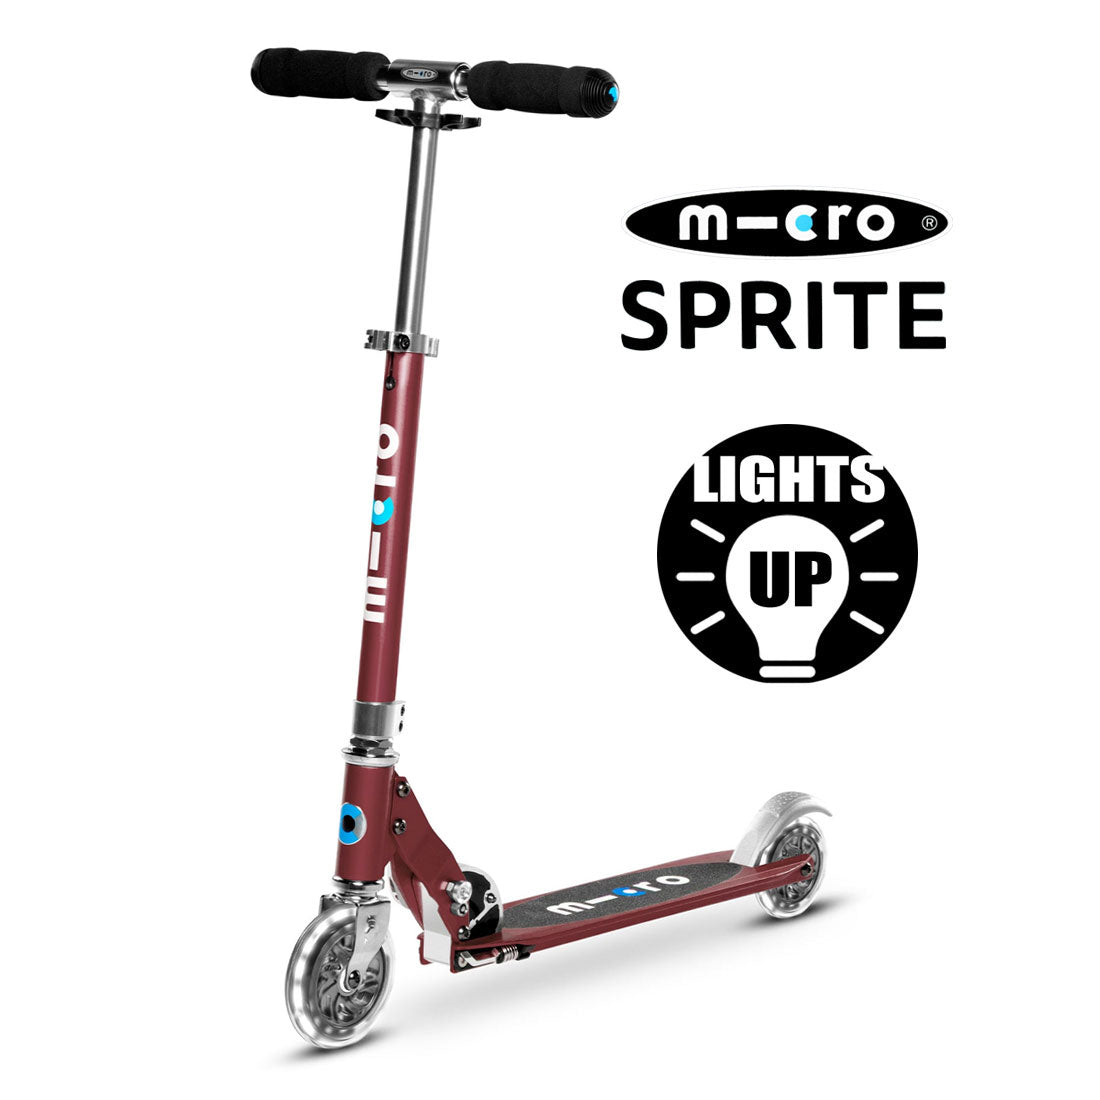 Micro Sprite LED Scooter - Autumn Red Scooter Completes Rec